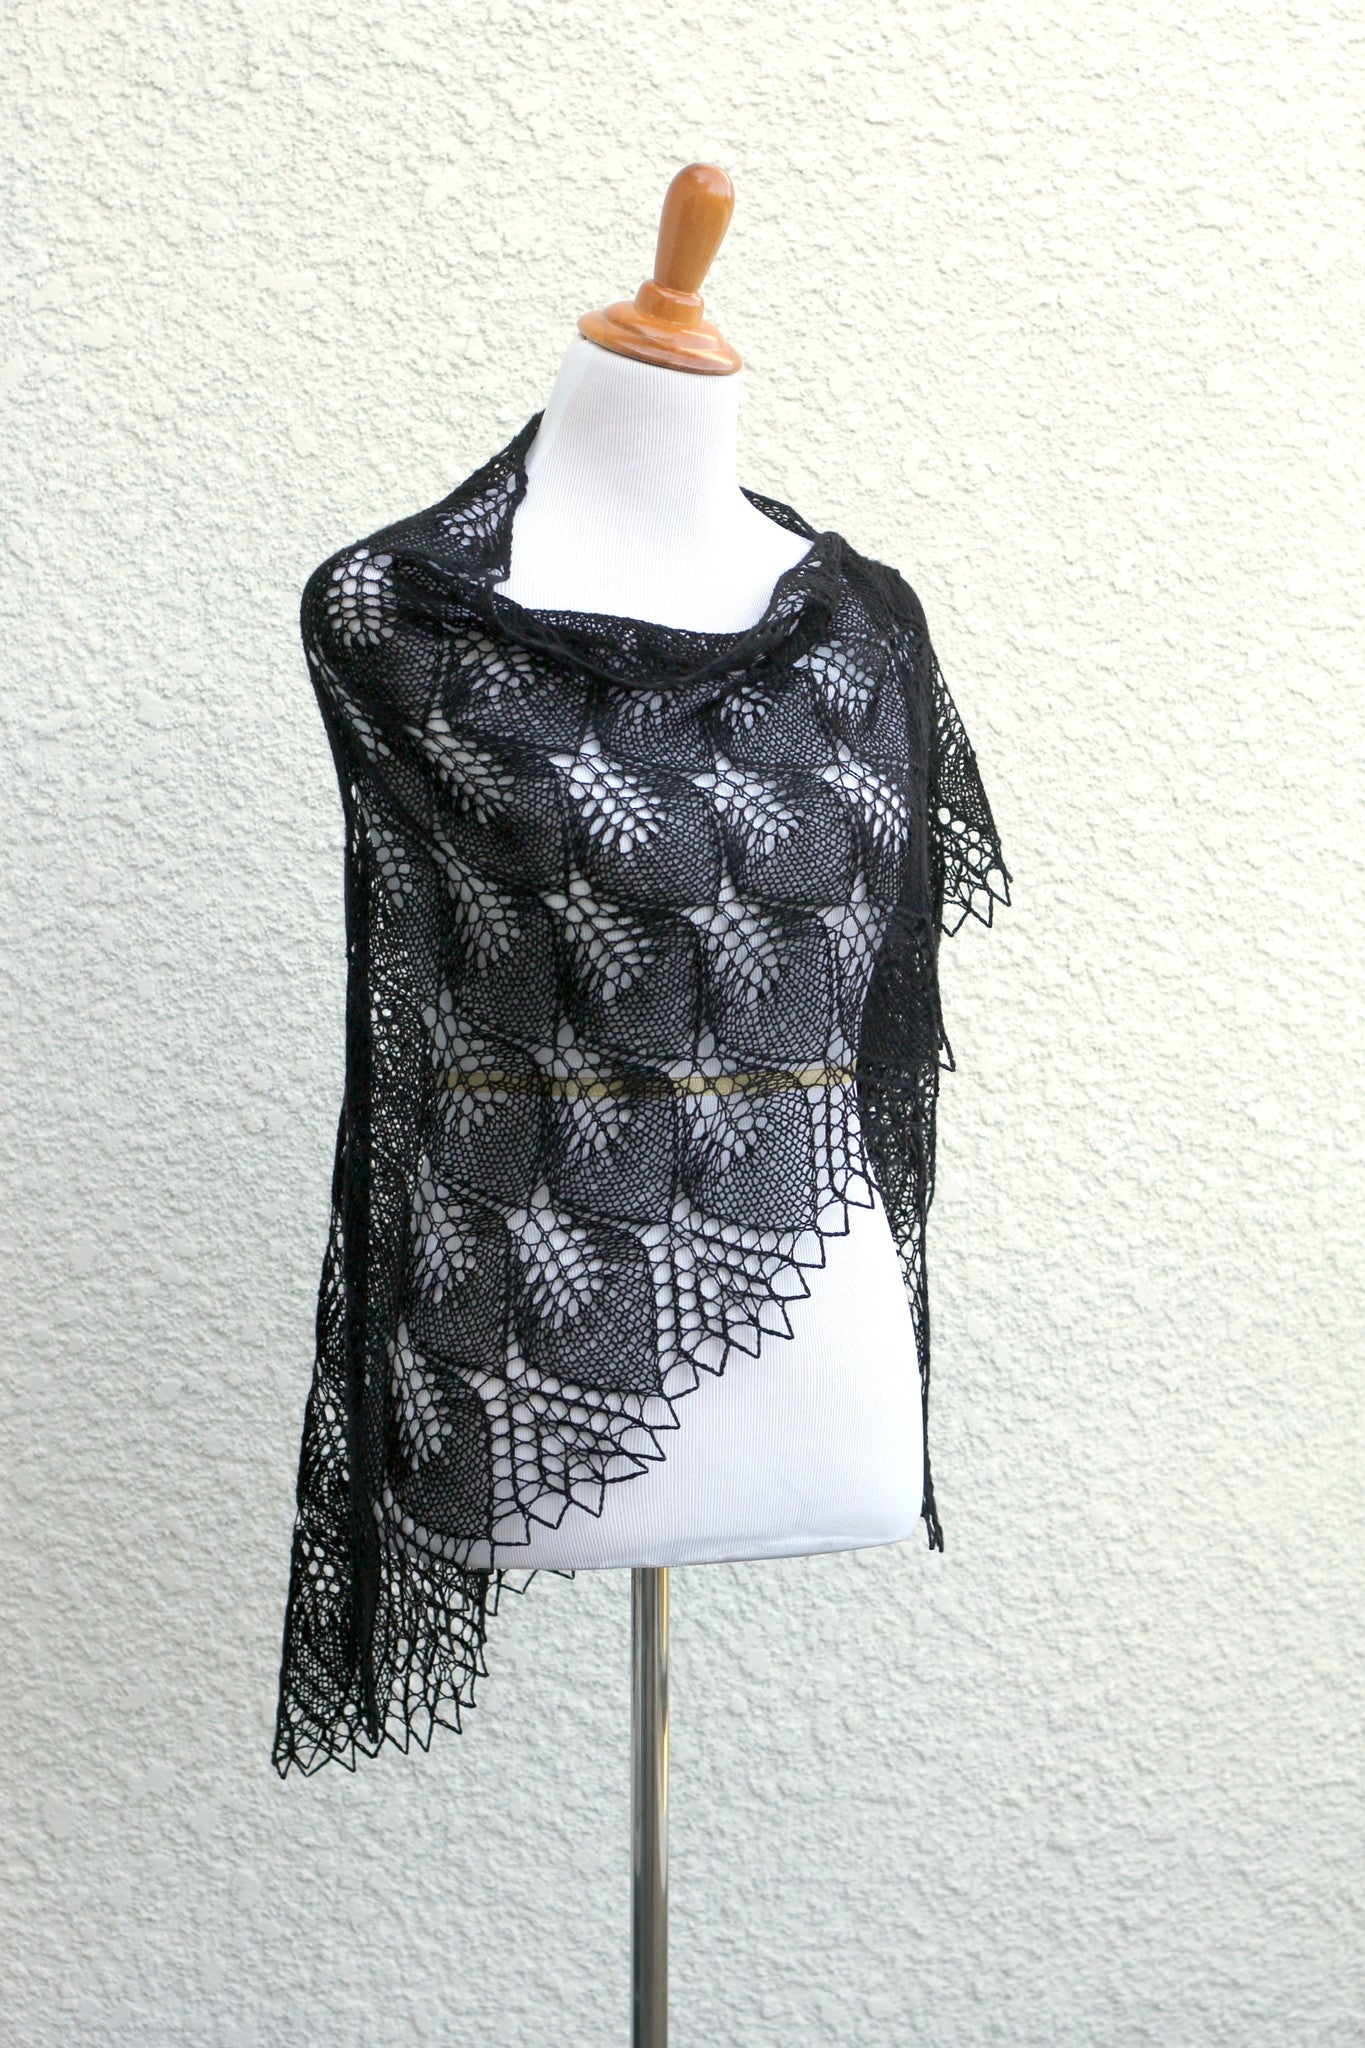 Knit shawl in black lace, knitted shawl, gift for her